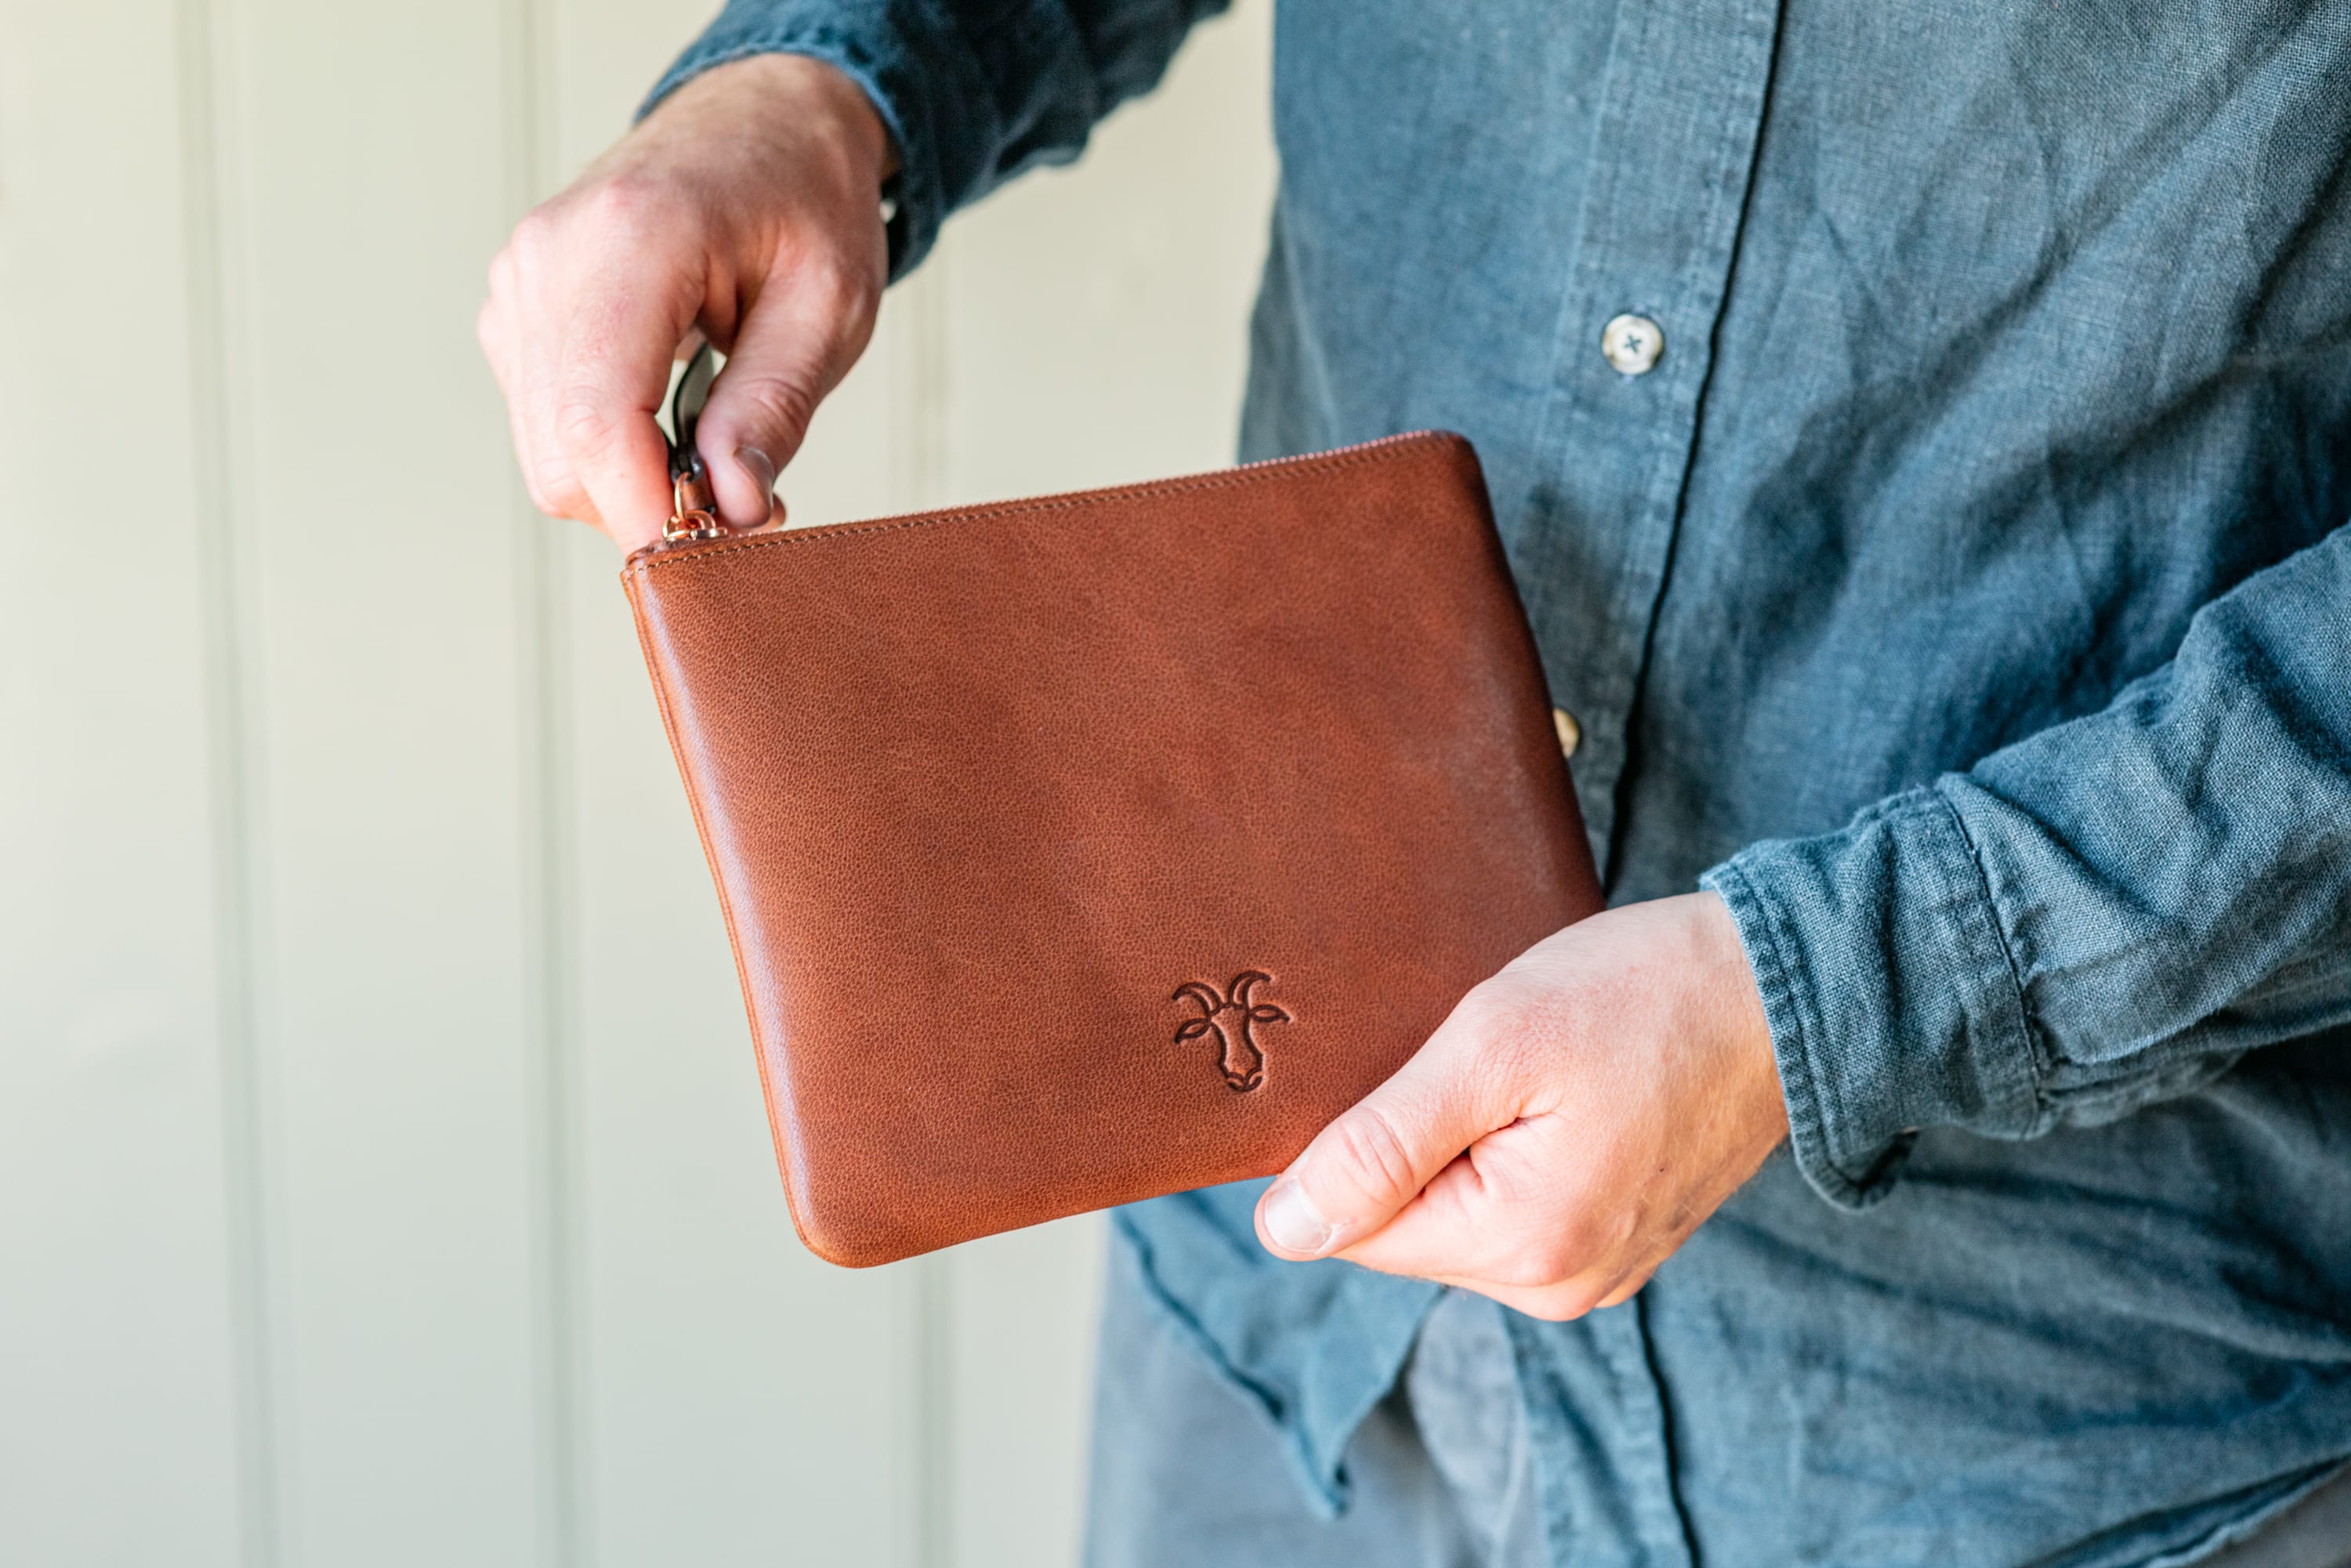 How to waterproof and extend the lifetime of your leather goods